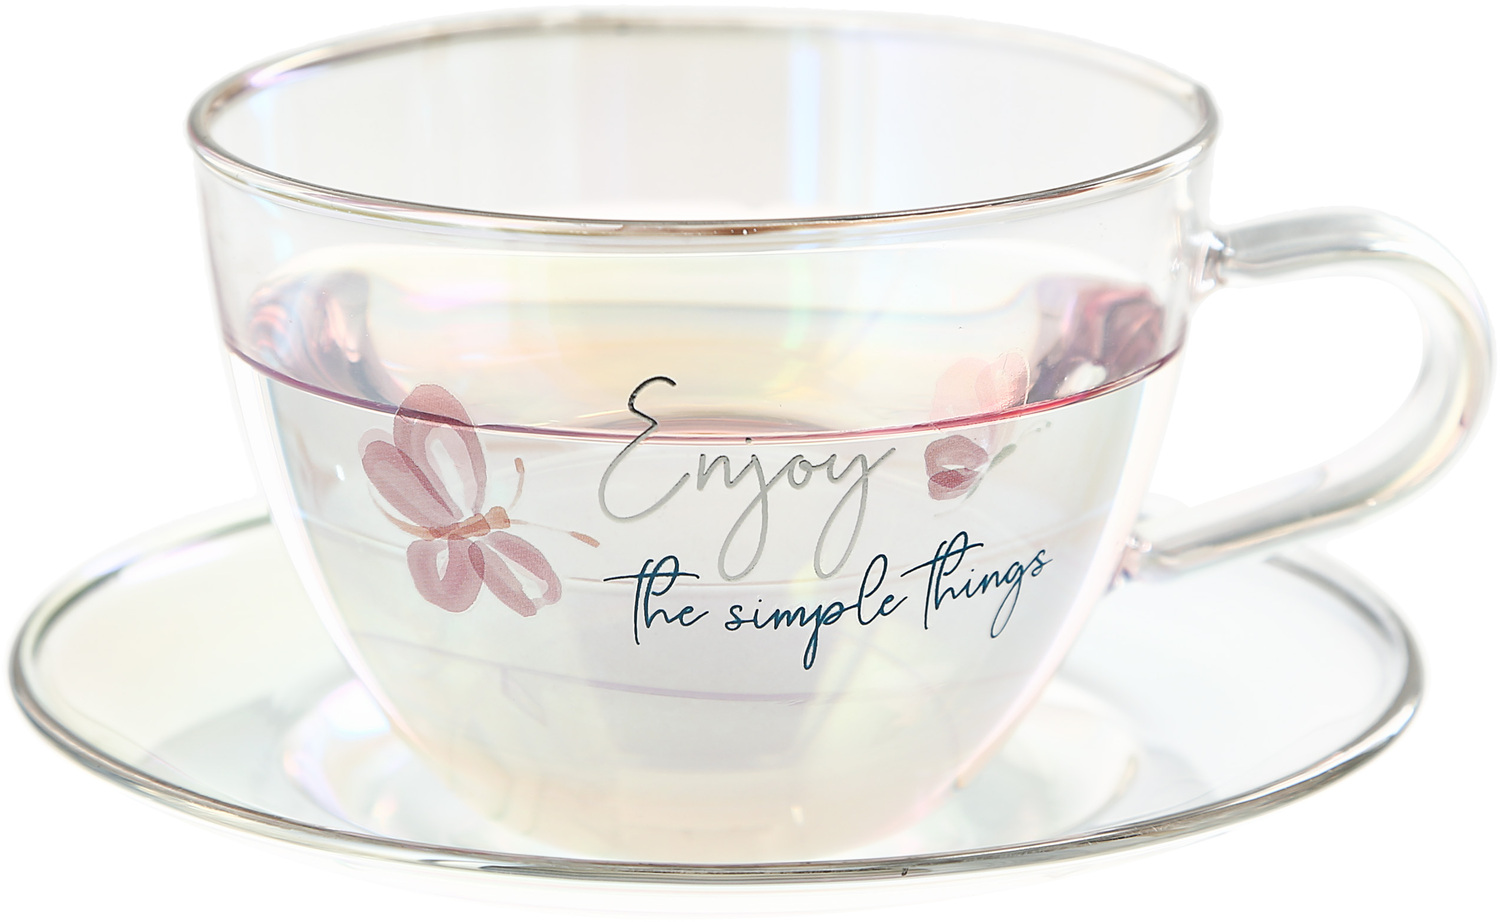 Enjoy by Rosy Heart - Enjoy - 7 oz Glass Teacup and Saucer